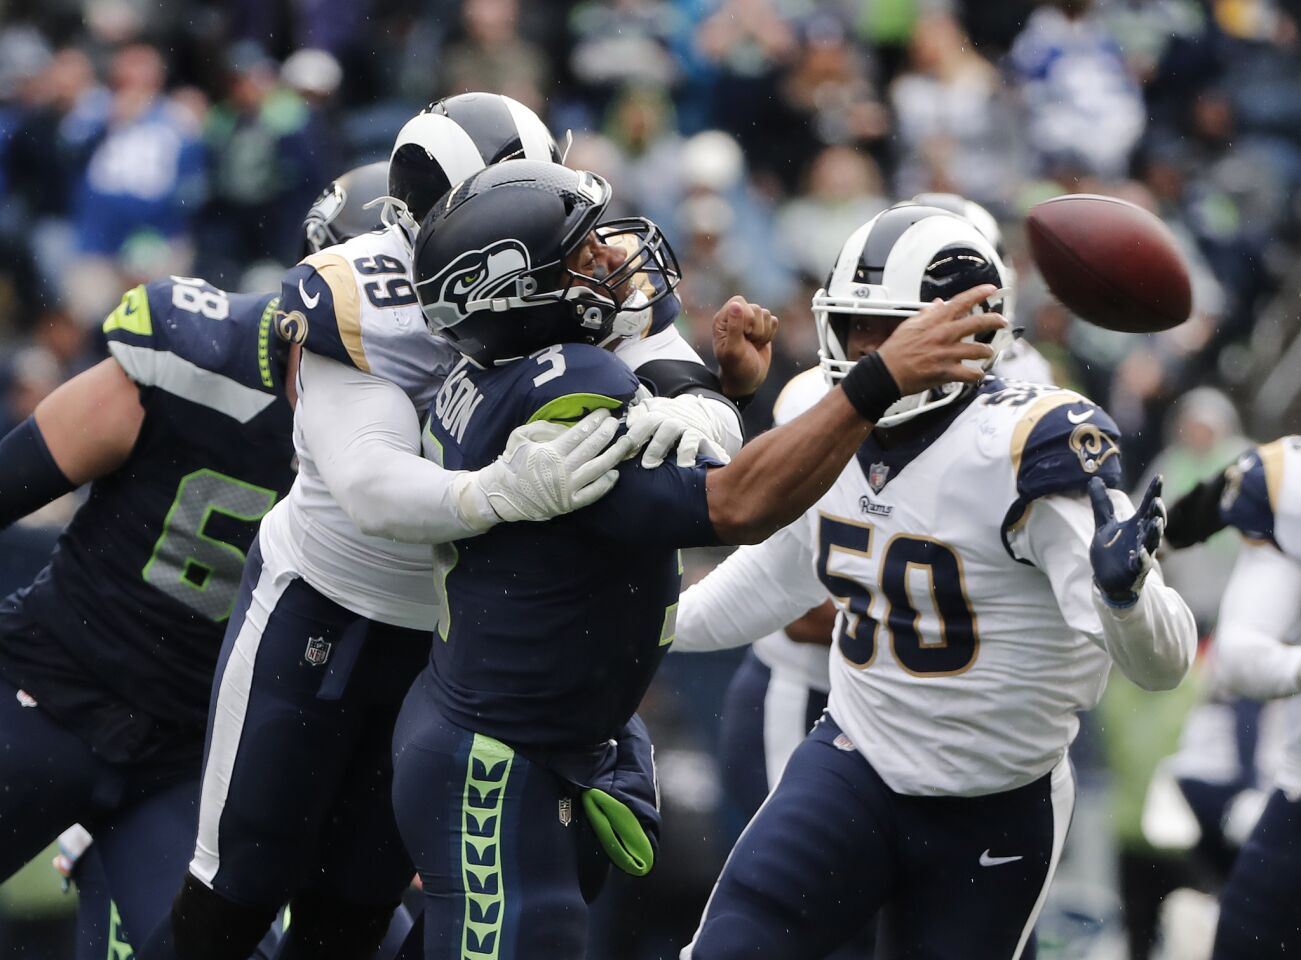 Rams defensive tackle Aaron Donald (99) sacks Seattle Seahawks quarterback Russell Wilson (3) in the second half at CenturyLink Field on Sunday in Seattle.